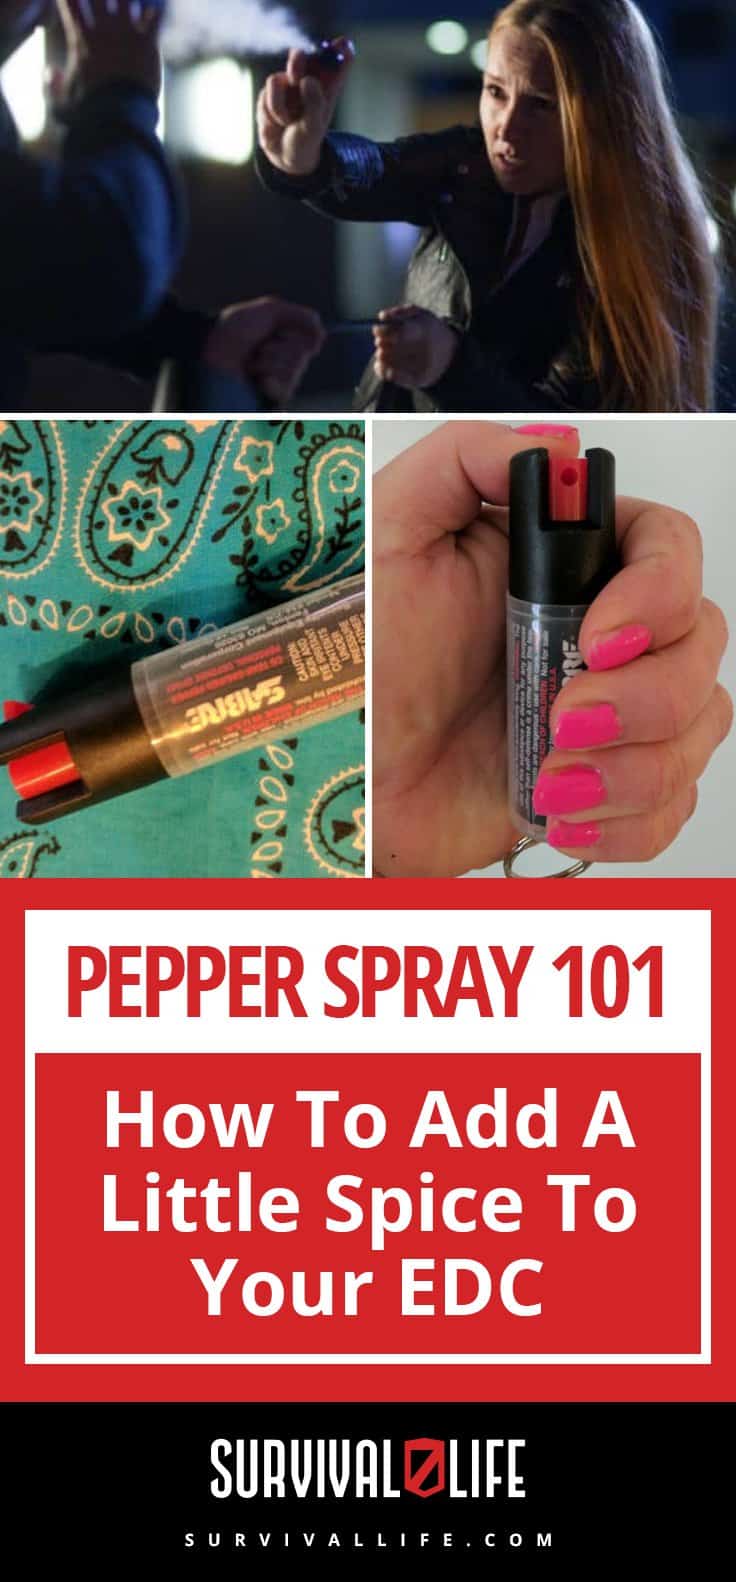 Pinterest Placard | Pepper Spray 101: How To Add A Little Spice To Your EDC